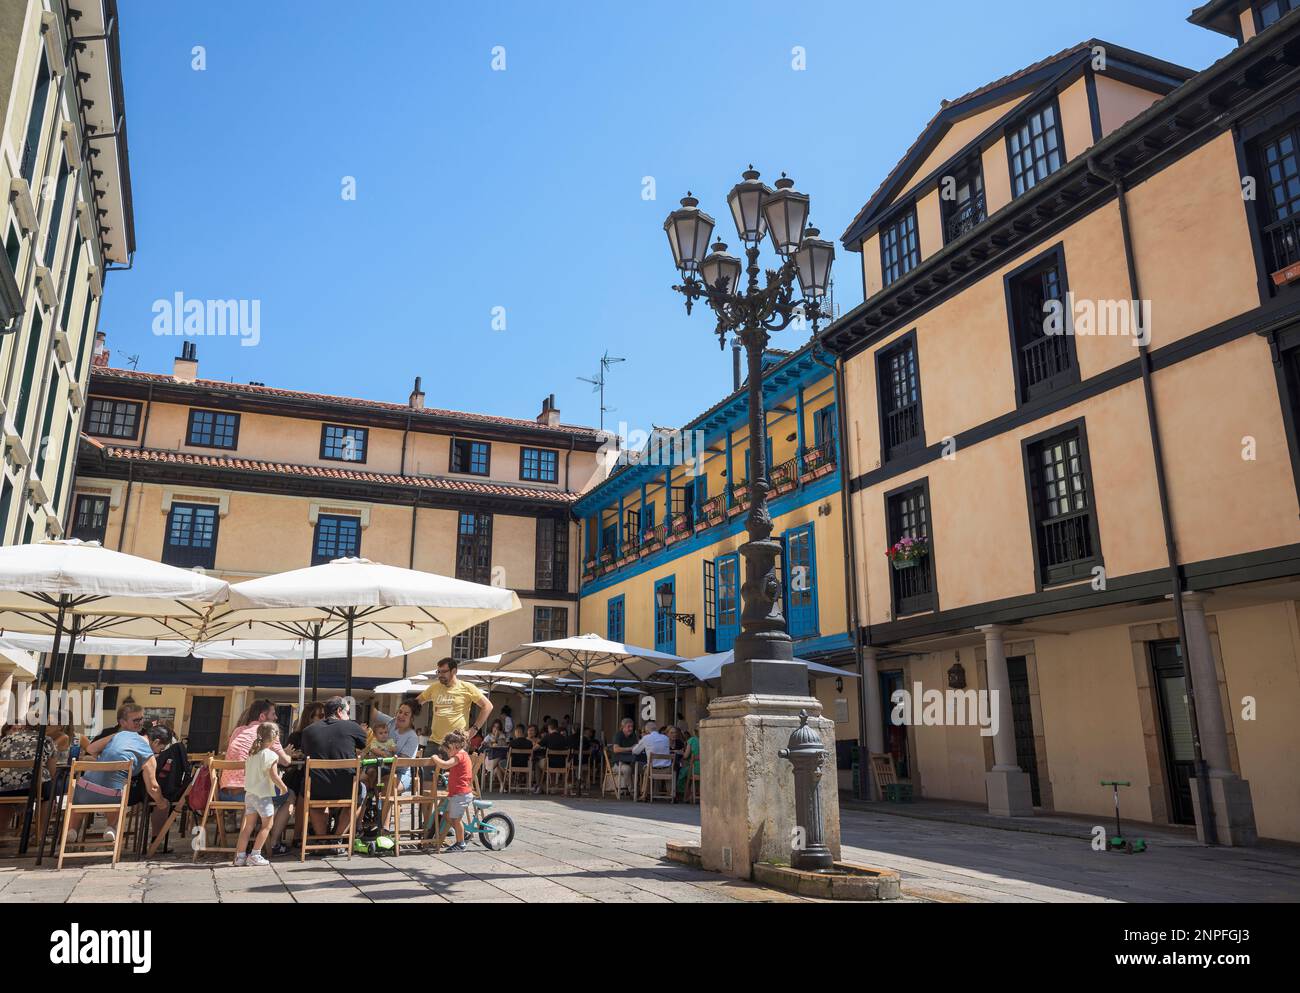 A bustling downtown plaza in Oviedo, Spain surrounded by stunning architecture and clear blue skies. Stock Photo